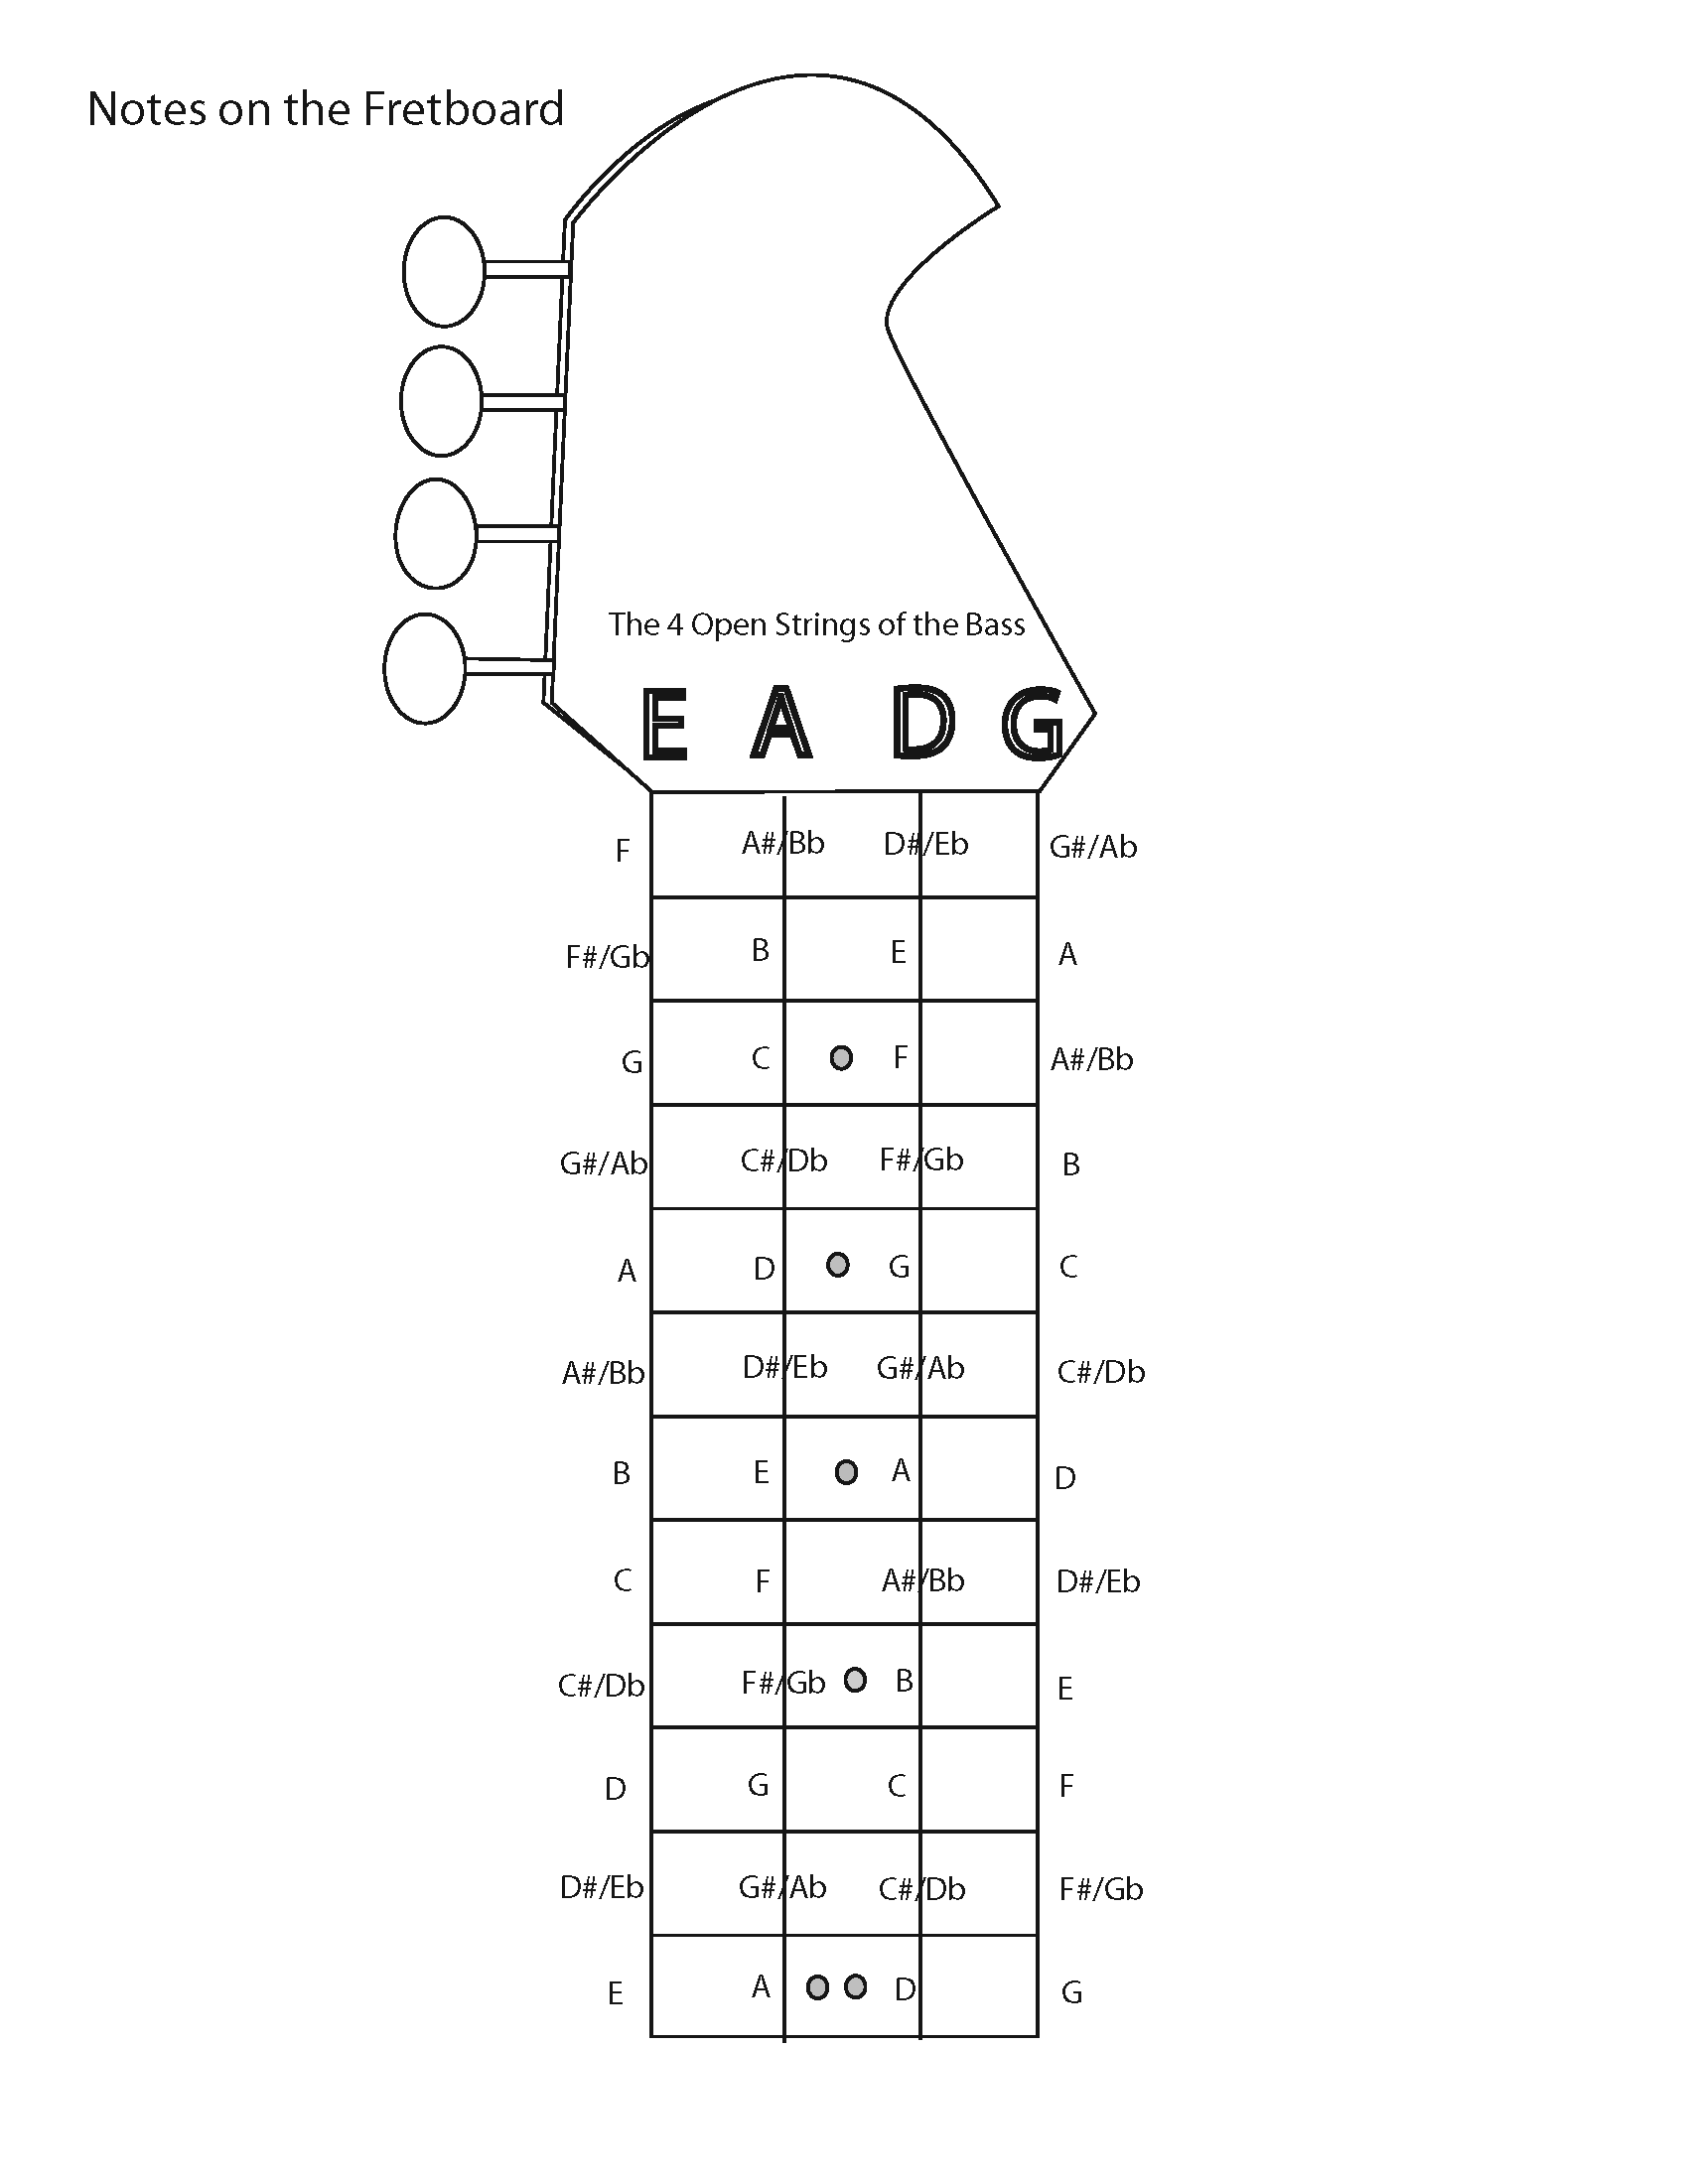 4-string-bass-fingerboard-chart-pictures-to-pin-on-pinterest-pinsdaddy